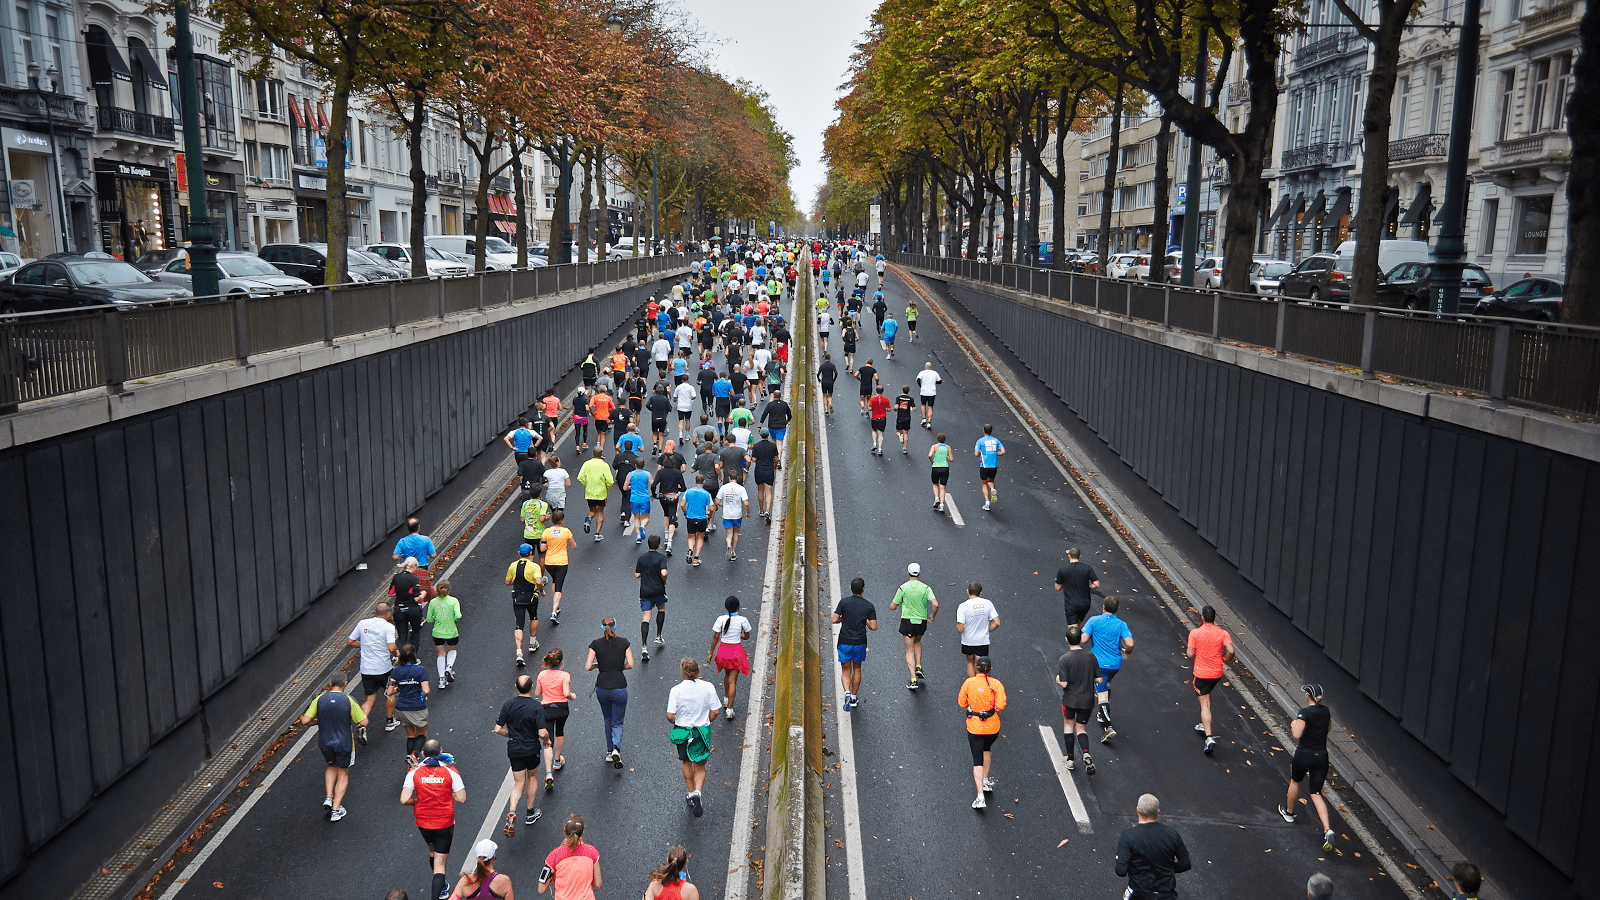 How To Know If You’re Ready To Start Training For A Marathon